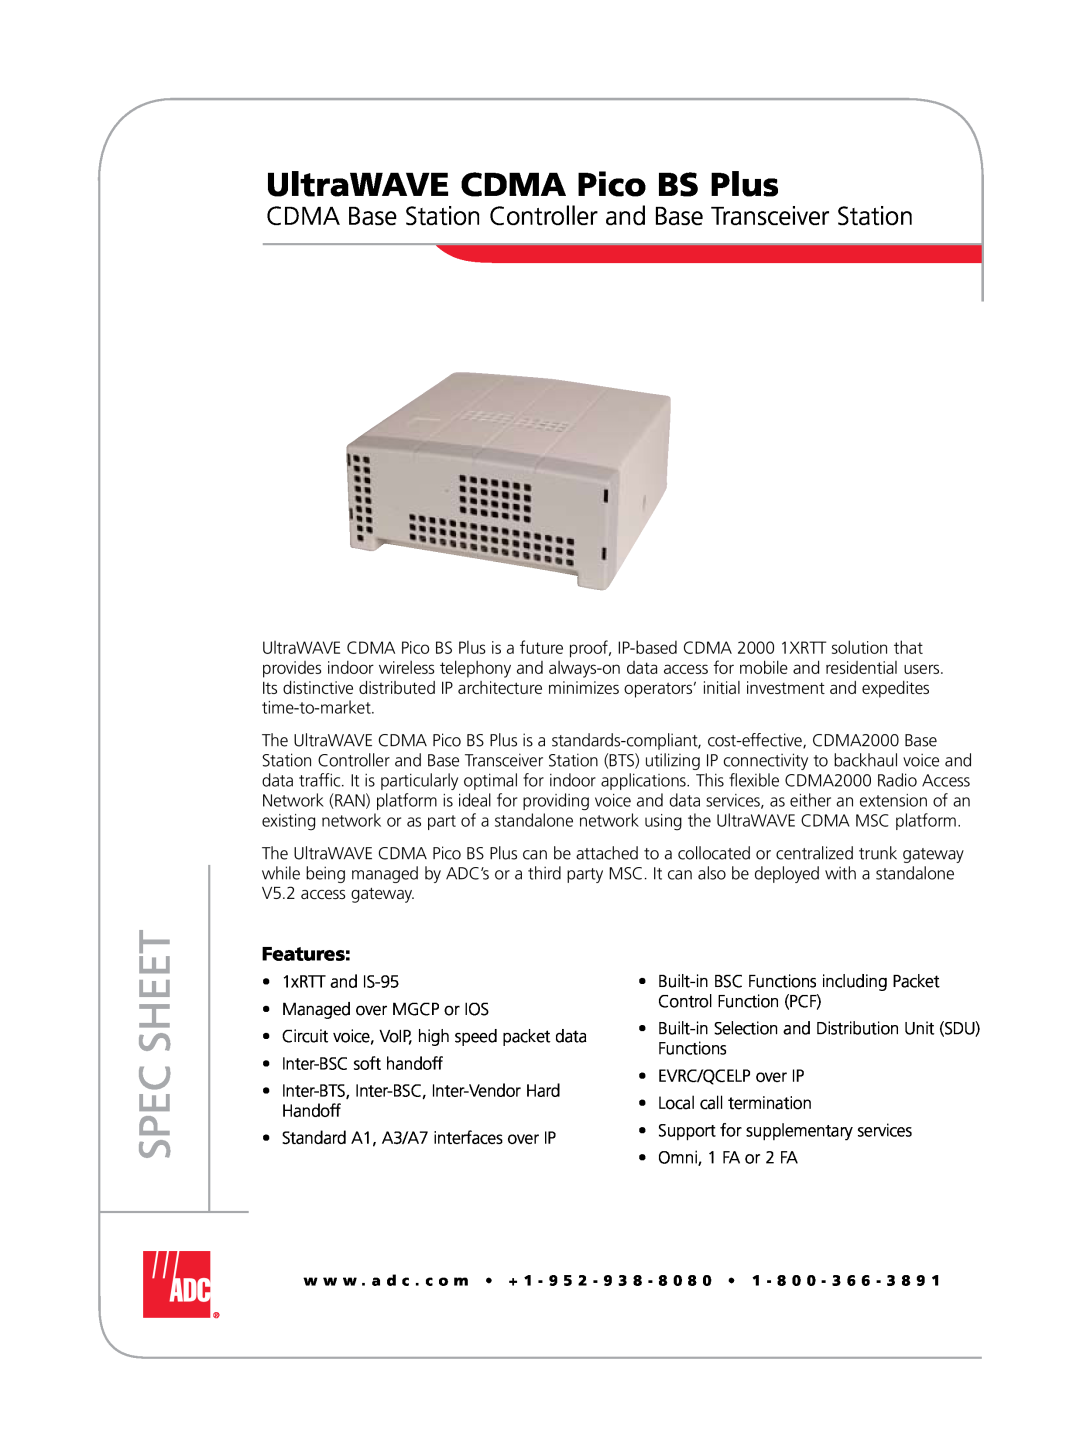 ADC UltraWAVE CDMA Pico BS Plus manual CDMA Base Station Controller and Base Transceiver Station, Spec Sheet, Features 